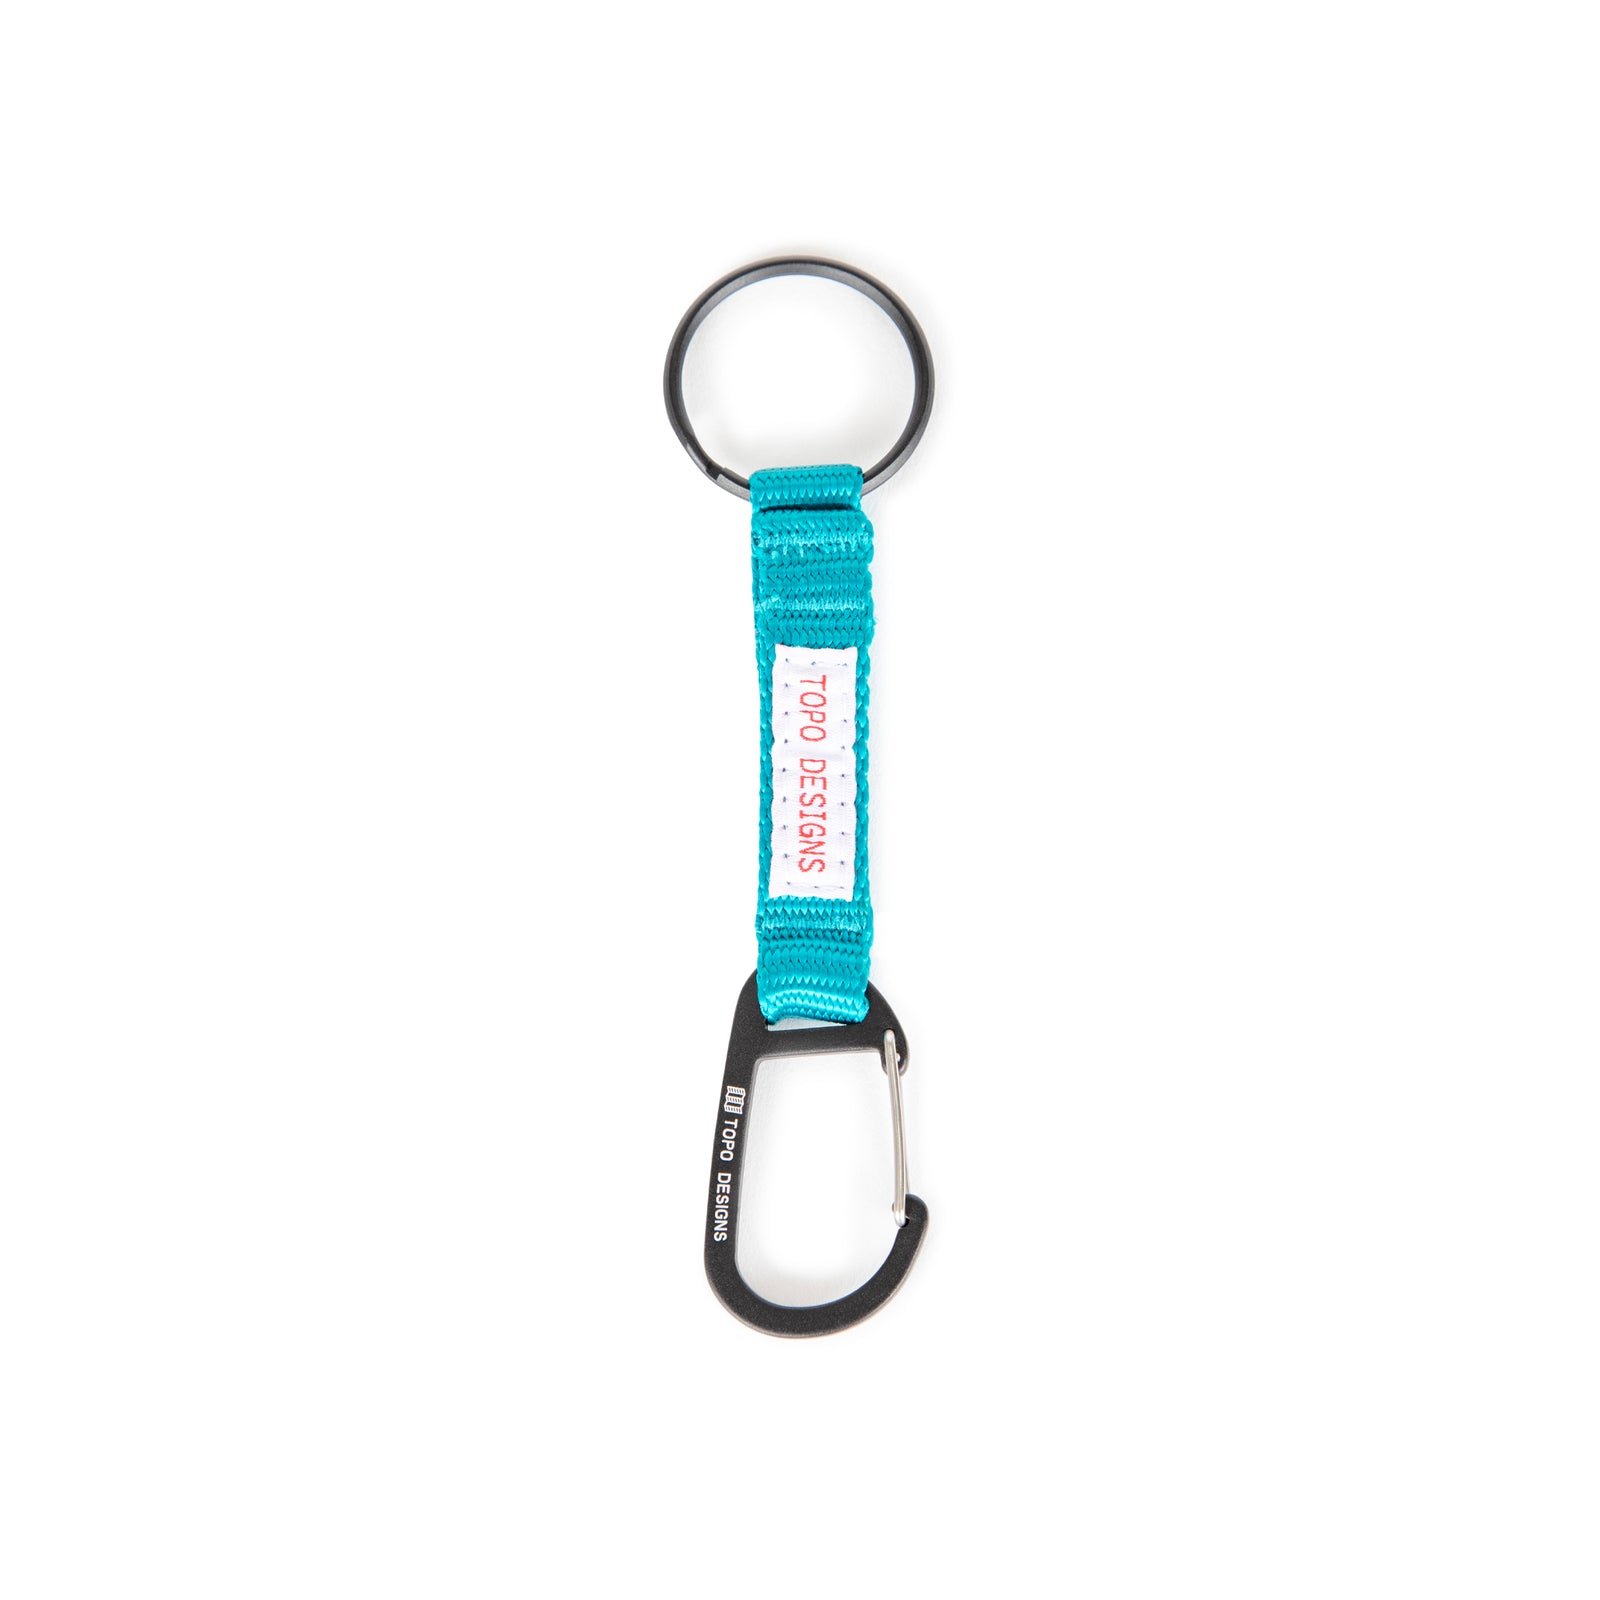 Topo Designs Key Clip carabiner keychain in "Turquoise" blue.